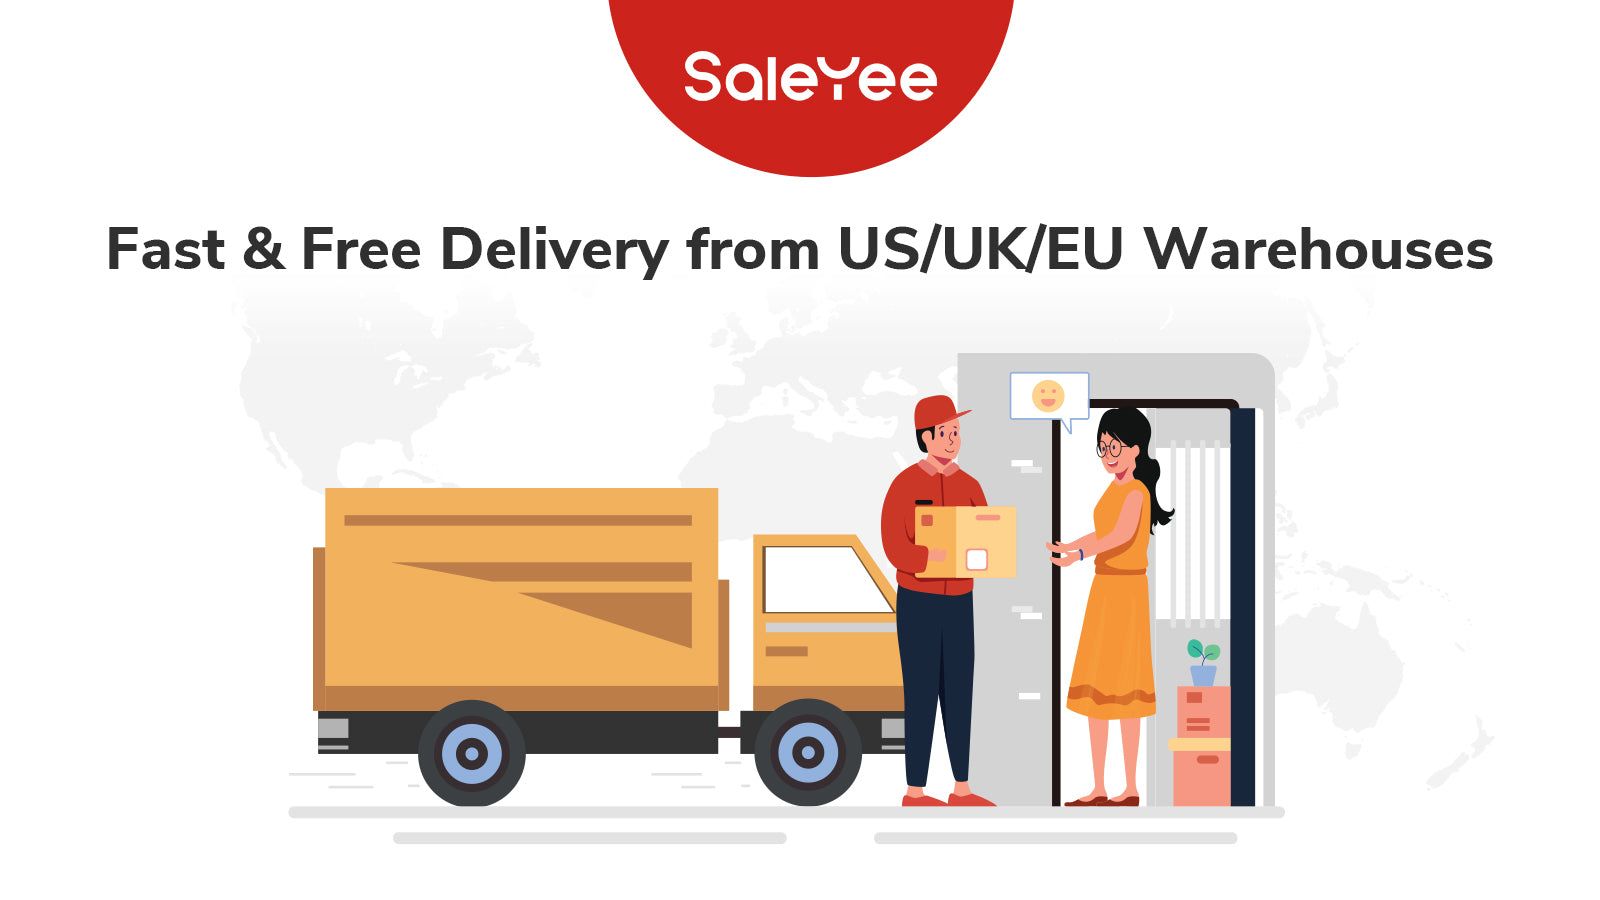 saleyee-offers-fast-and-free-delivery